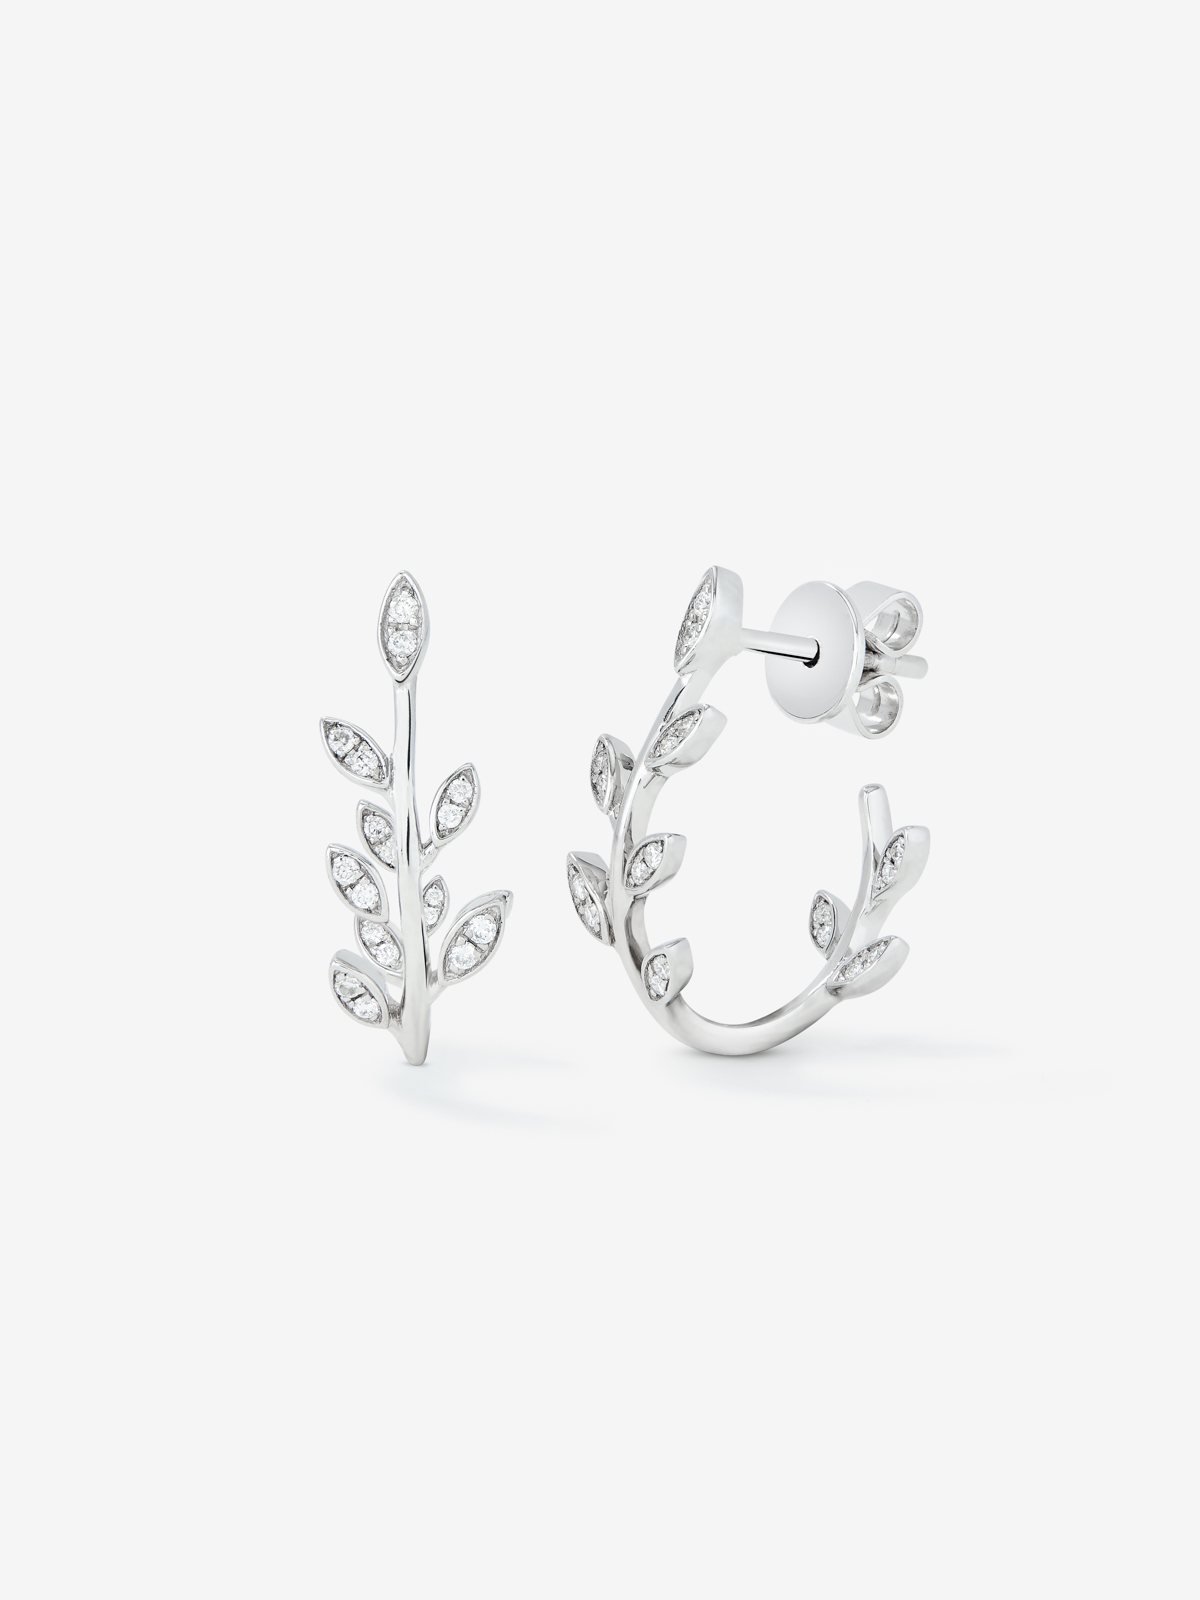 18K white gold leaf hoop earrings with pave diamond